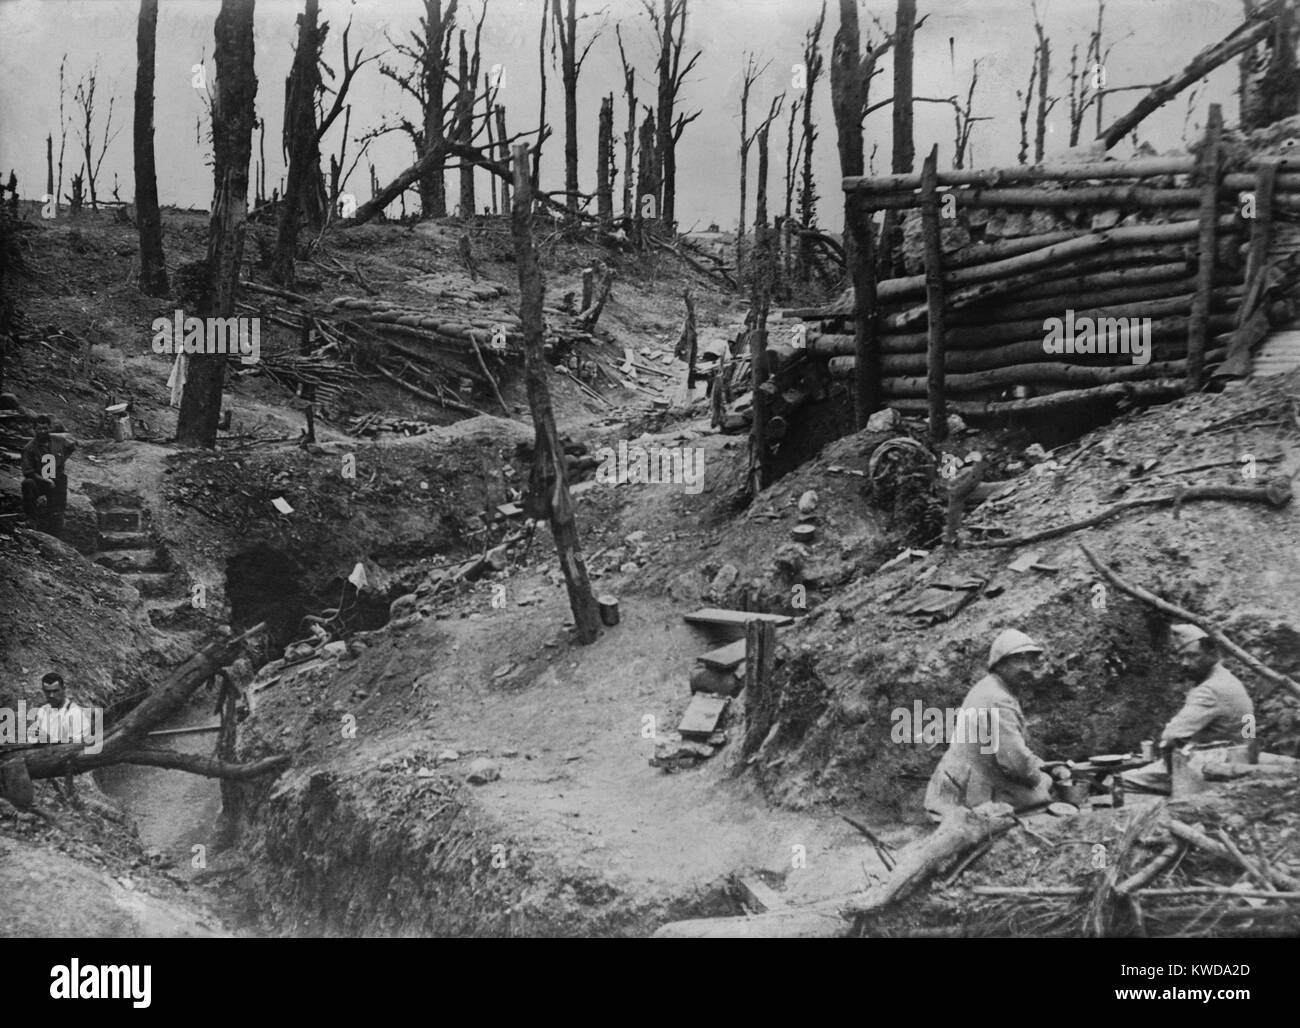 World War 1. Somme Offensive. A few Allied soldiers (probably French) soldiers occupy entrenchments and dugout bunkers in the shell blasted wood called Des Fermes in the Somme. Ca. 1916. (BSLOC 2013 1 134) Stock Photo